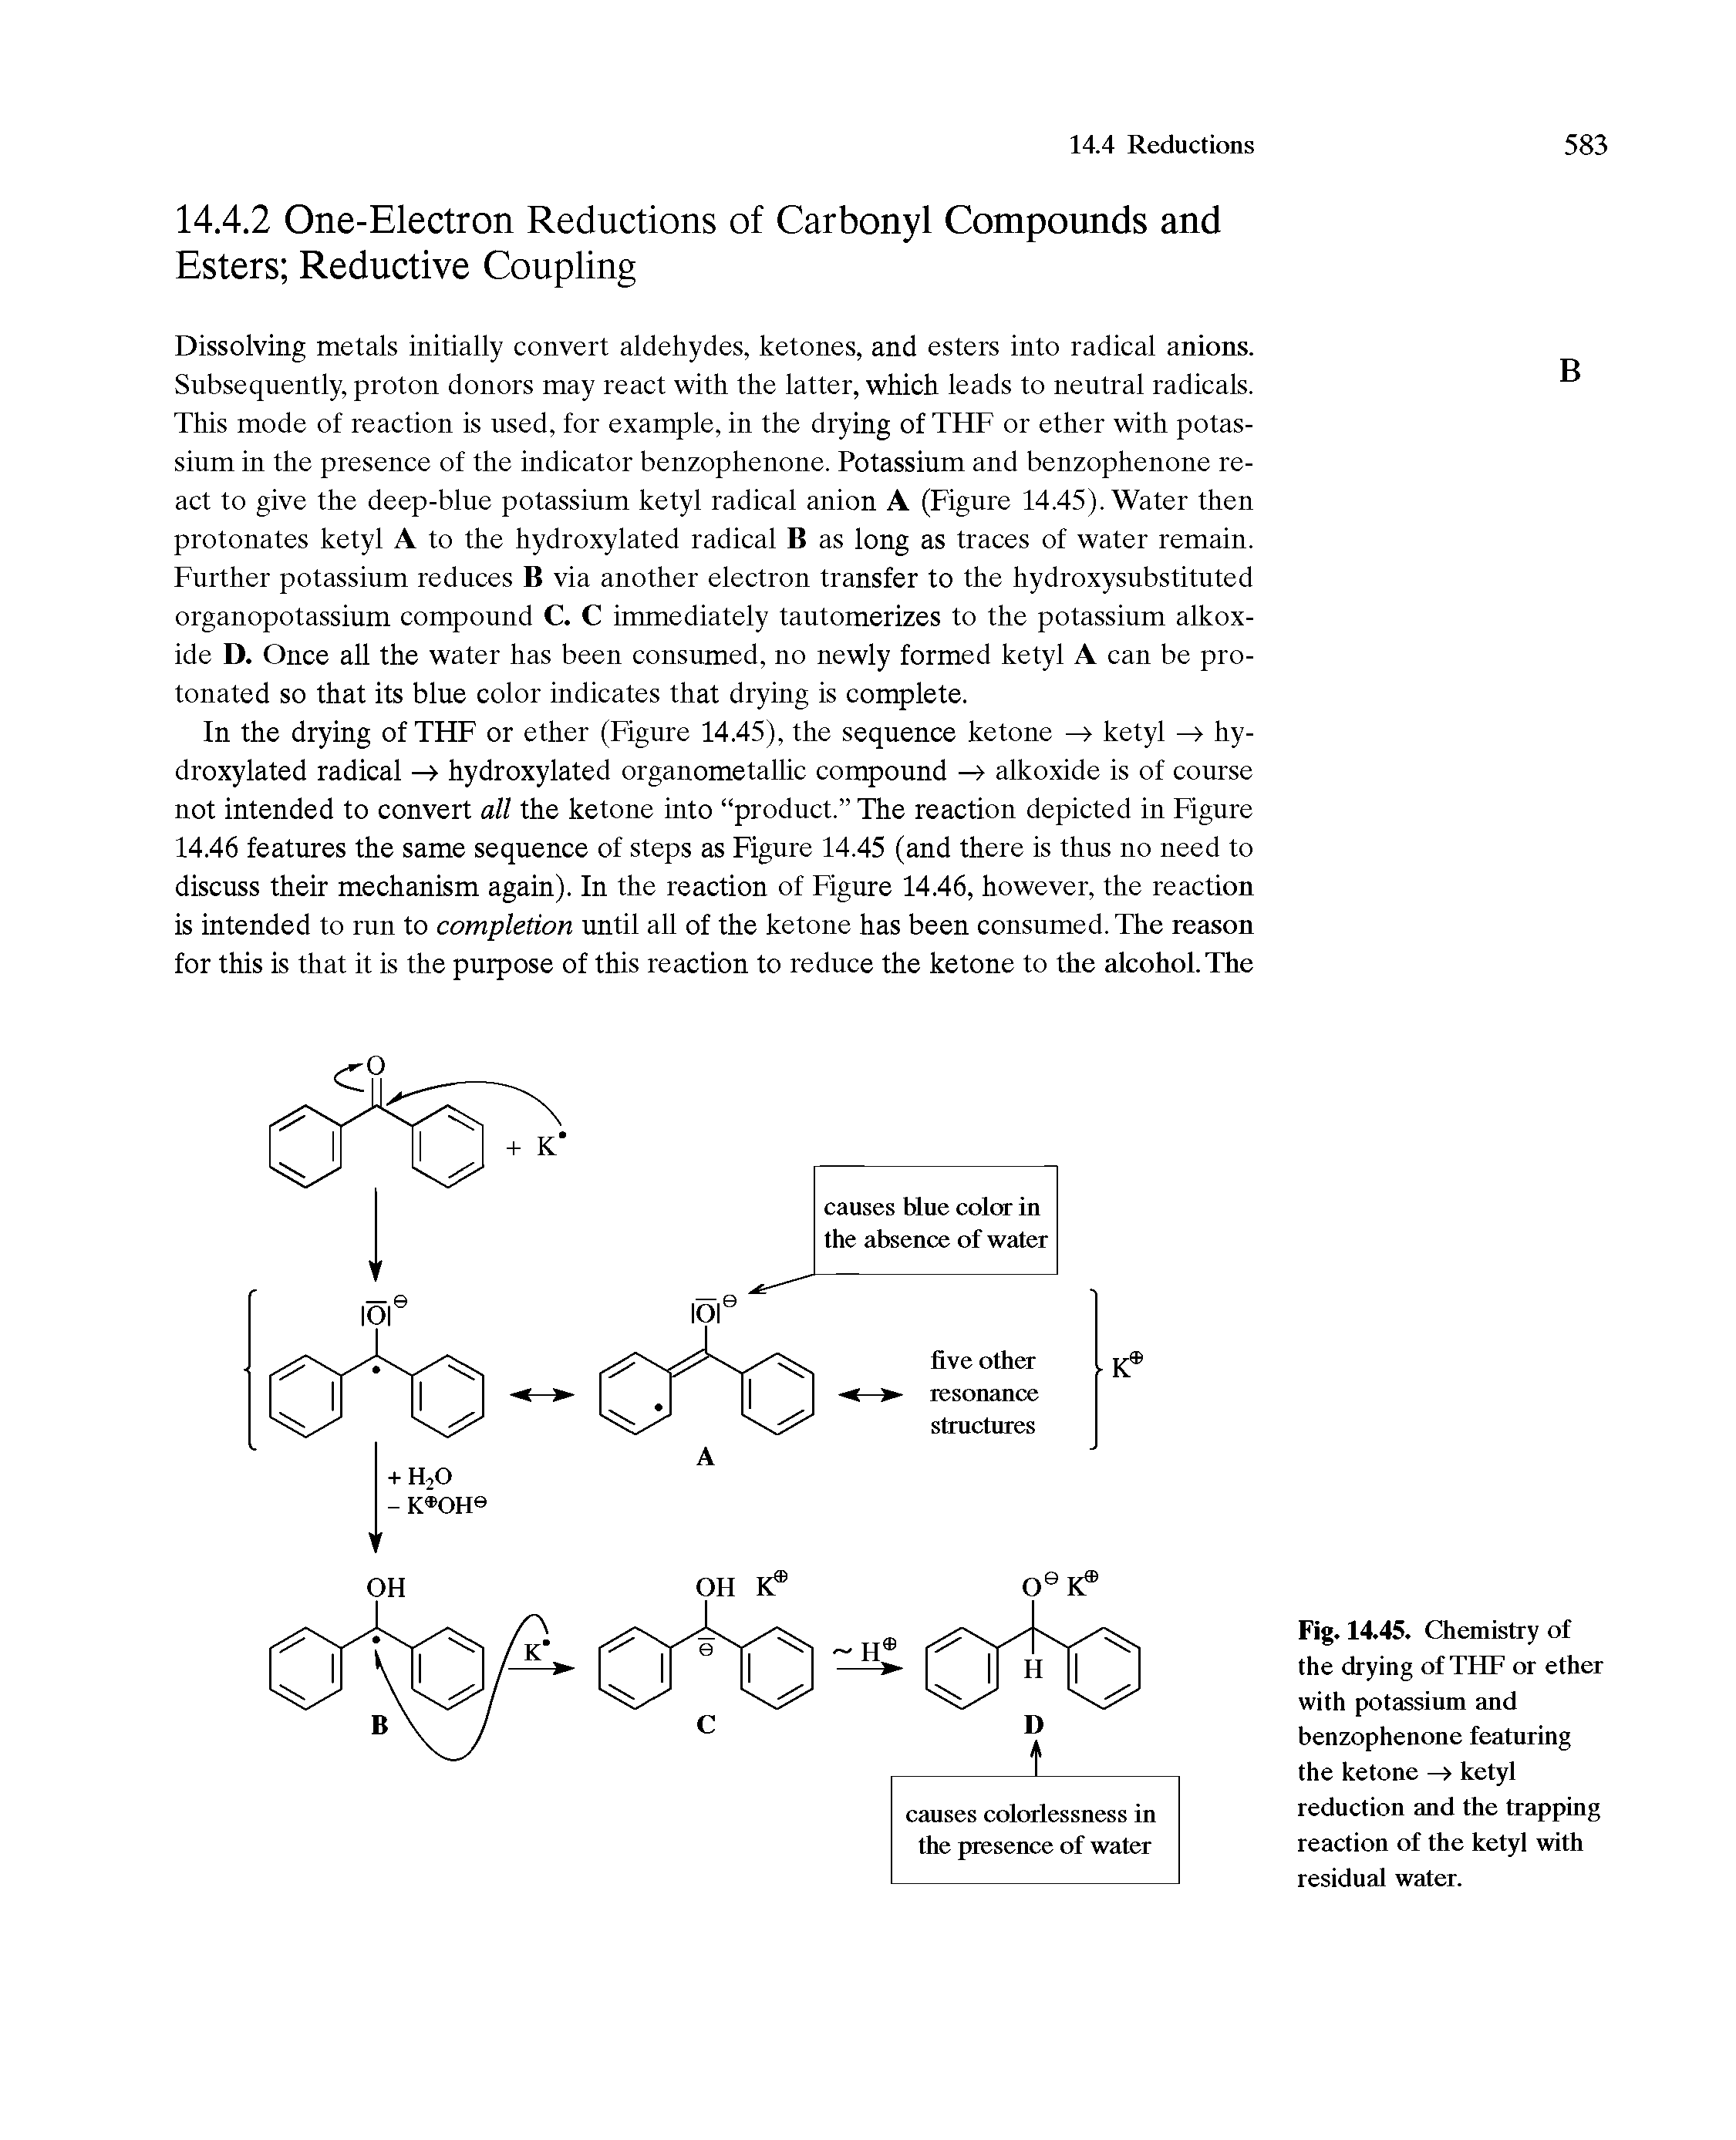 Fig. 14.45. Chemistry of the drying of THF or ether with potassium and benzophenone featuring the ketone -> ketyl reduction and the trapping reaction of the ketyl with residual water.